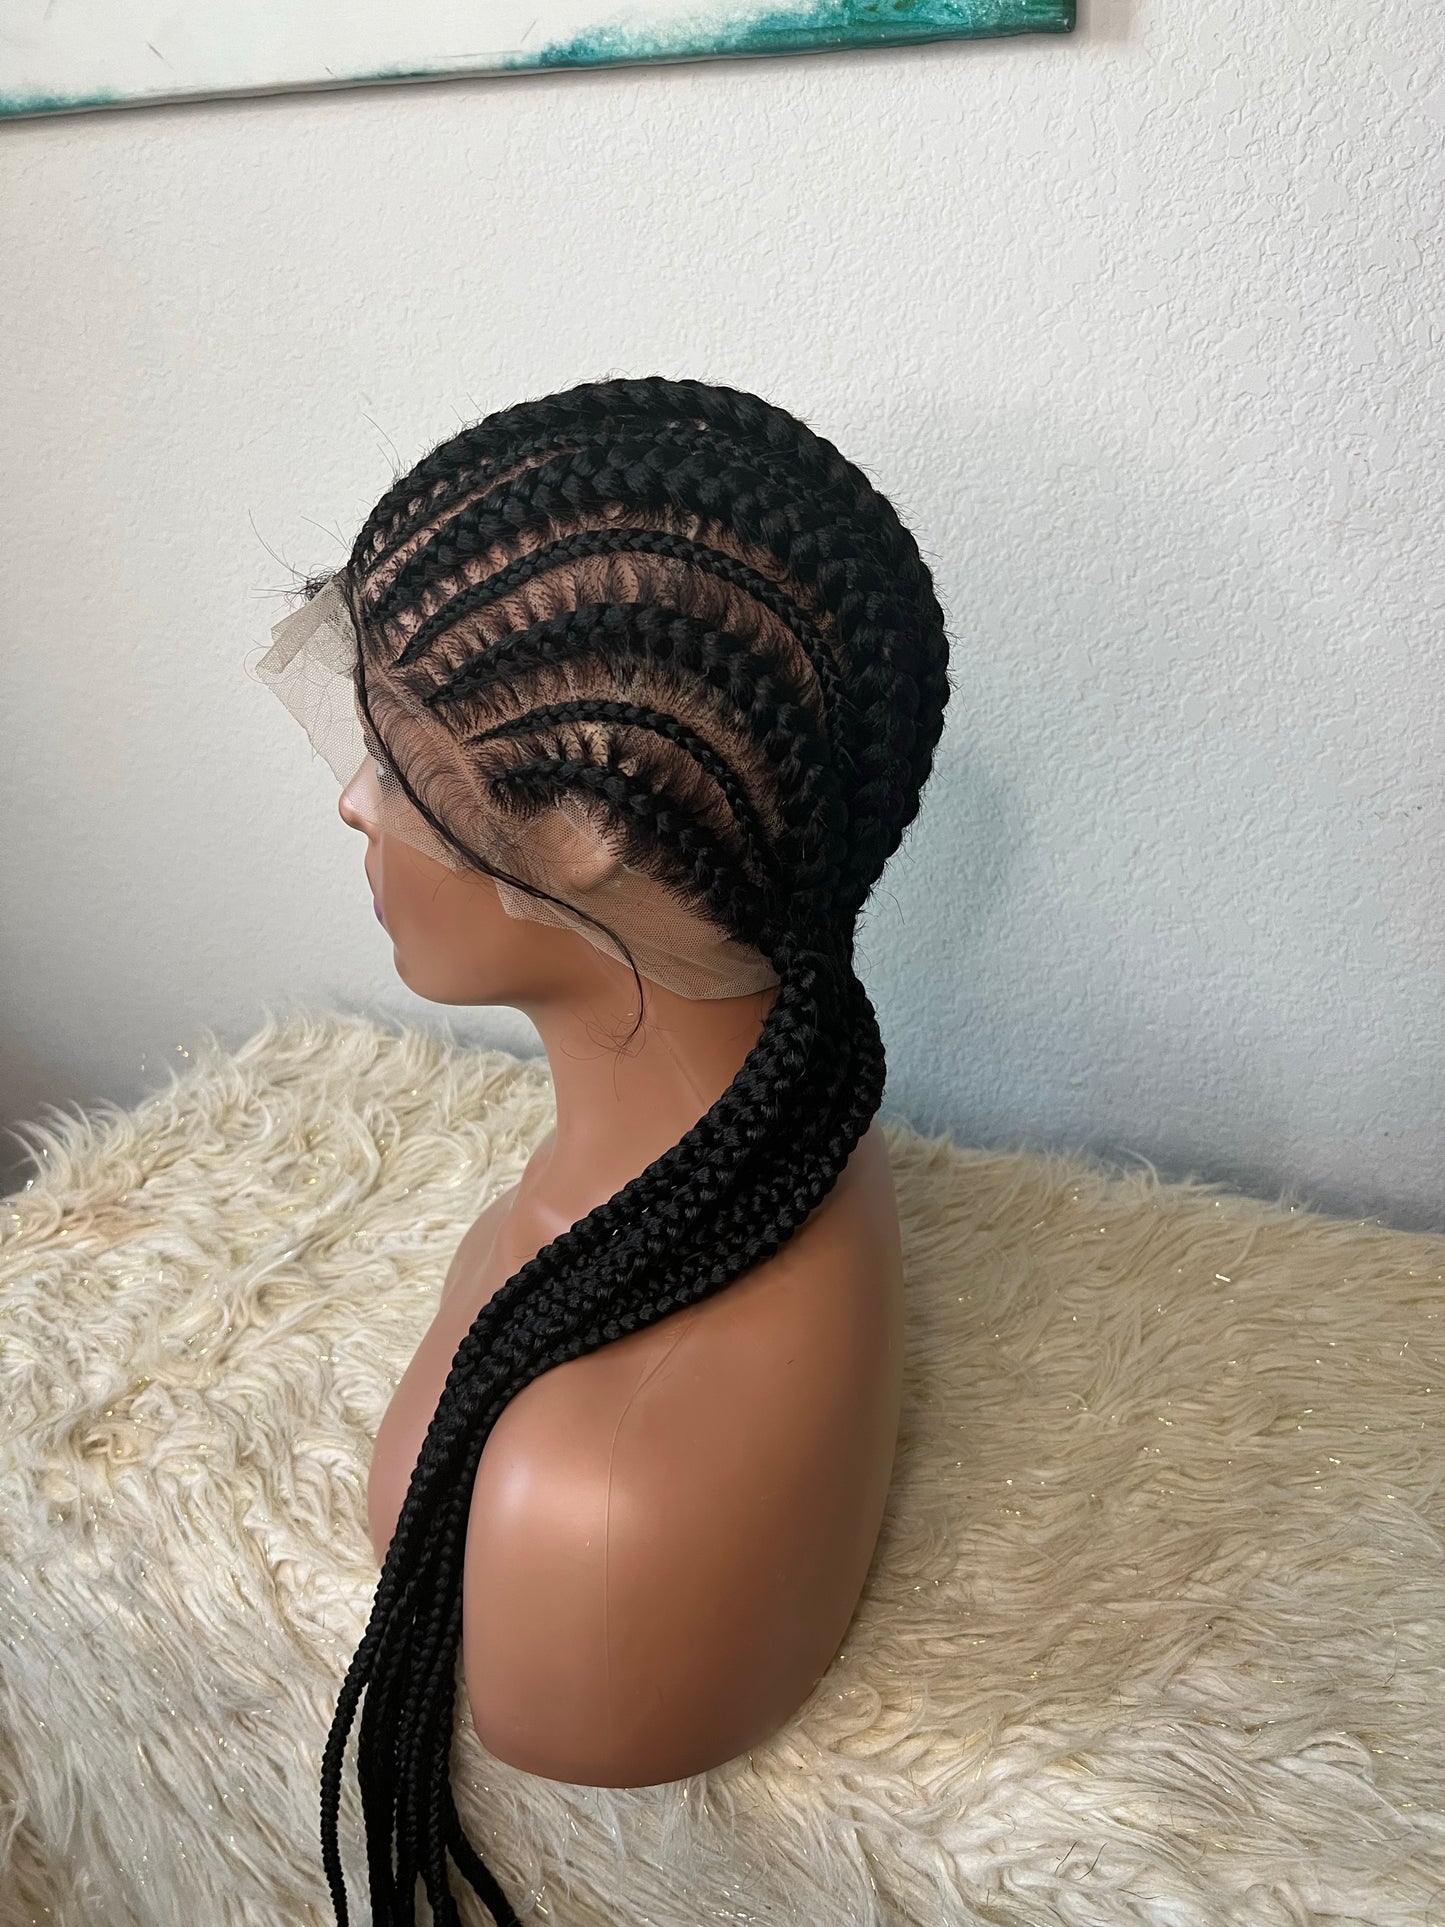 Stitched 9 braids to the back - sheshopperhairplace LLC